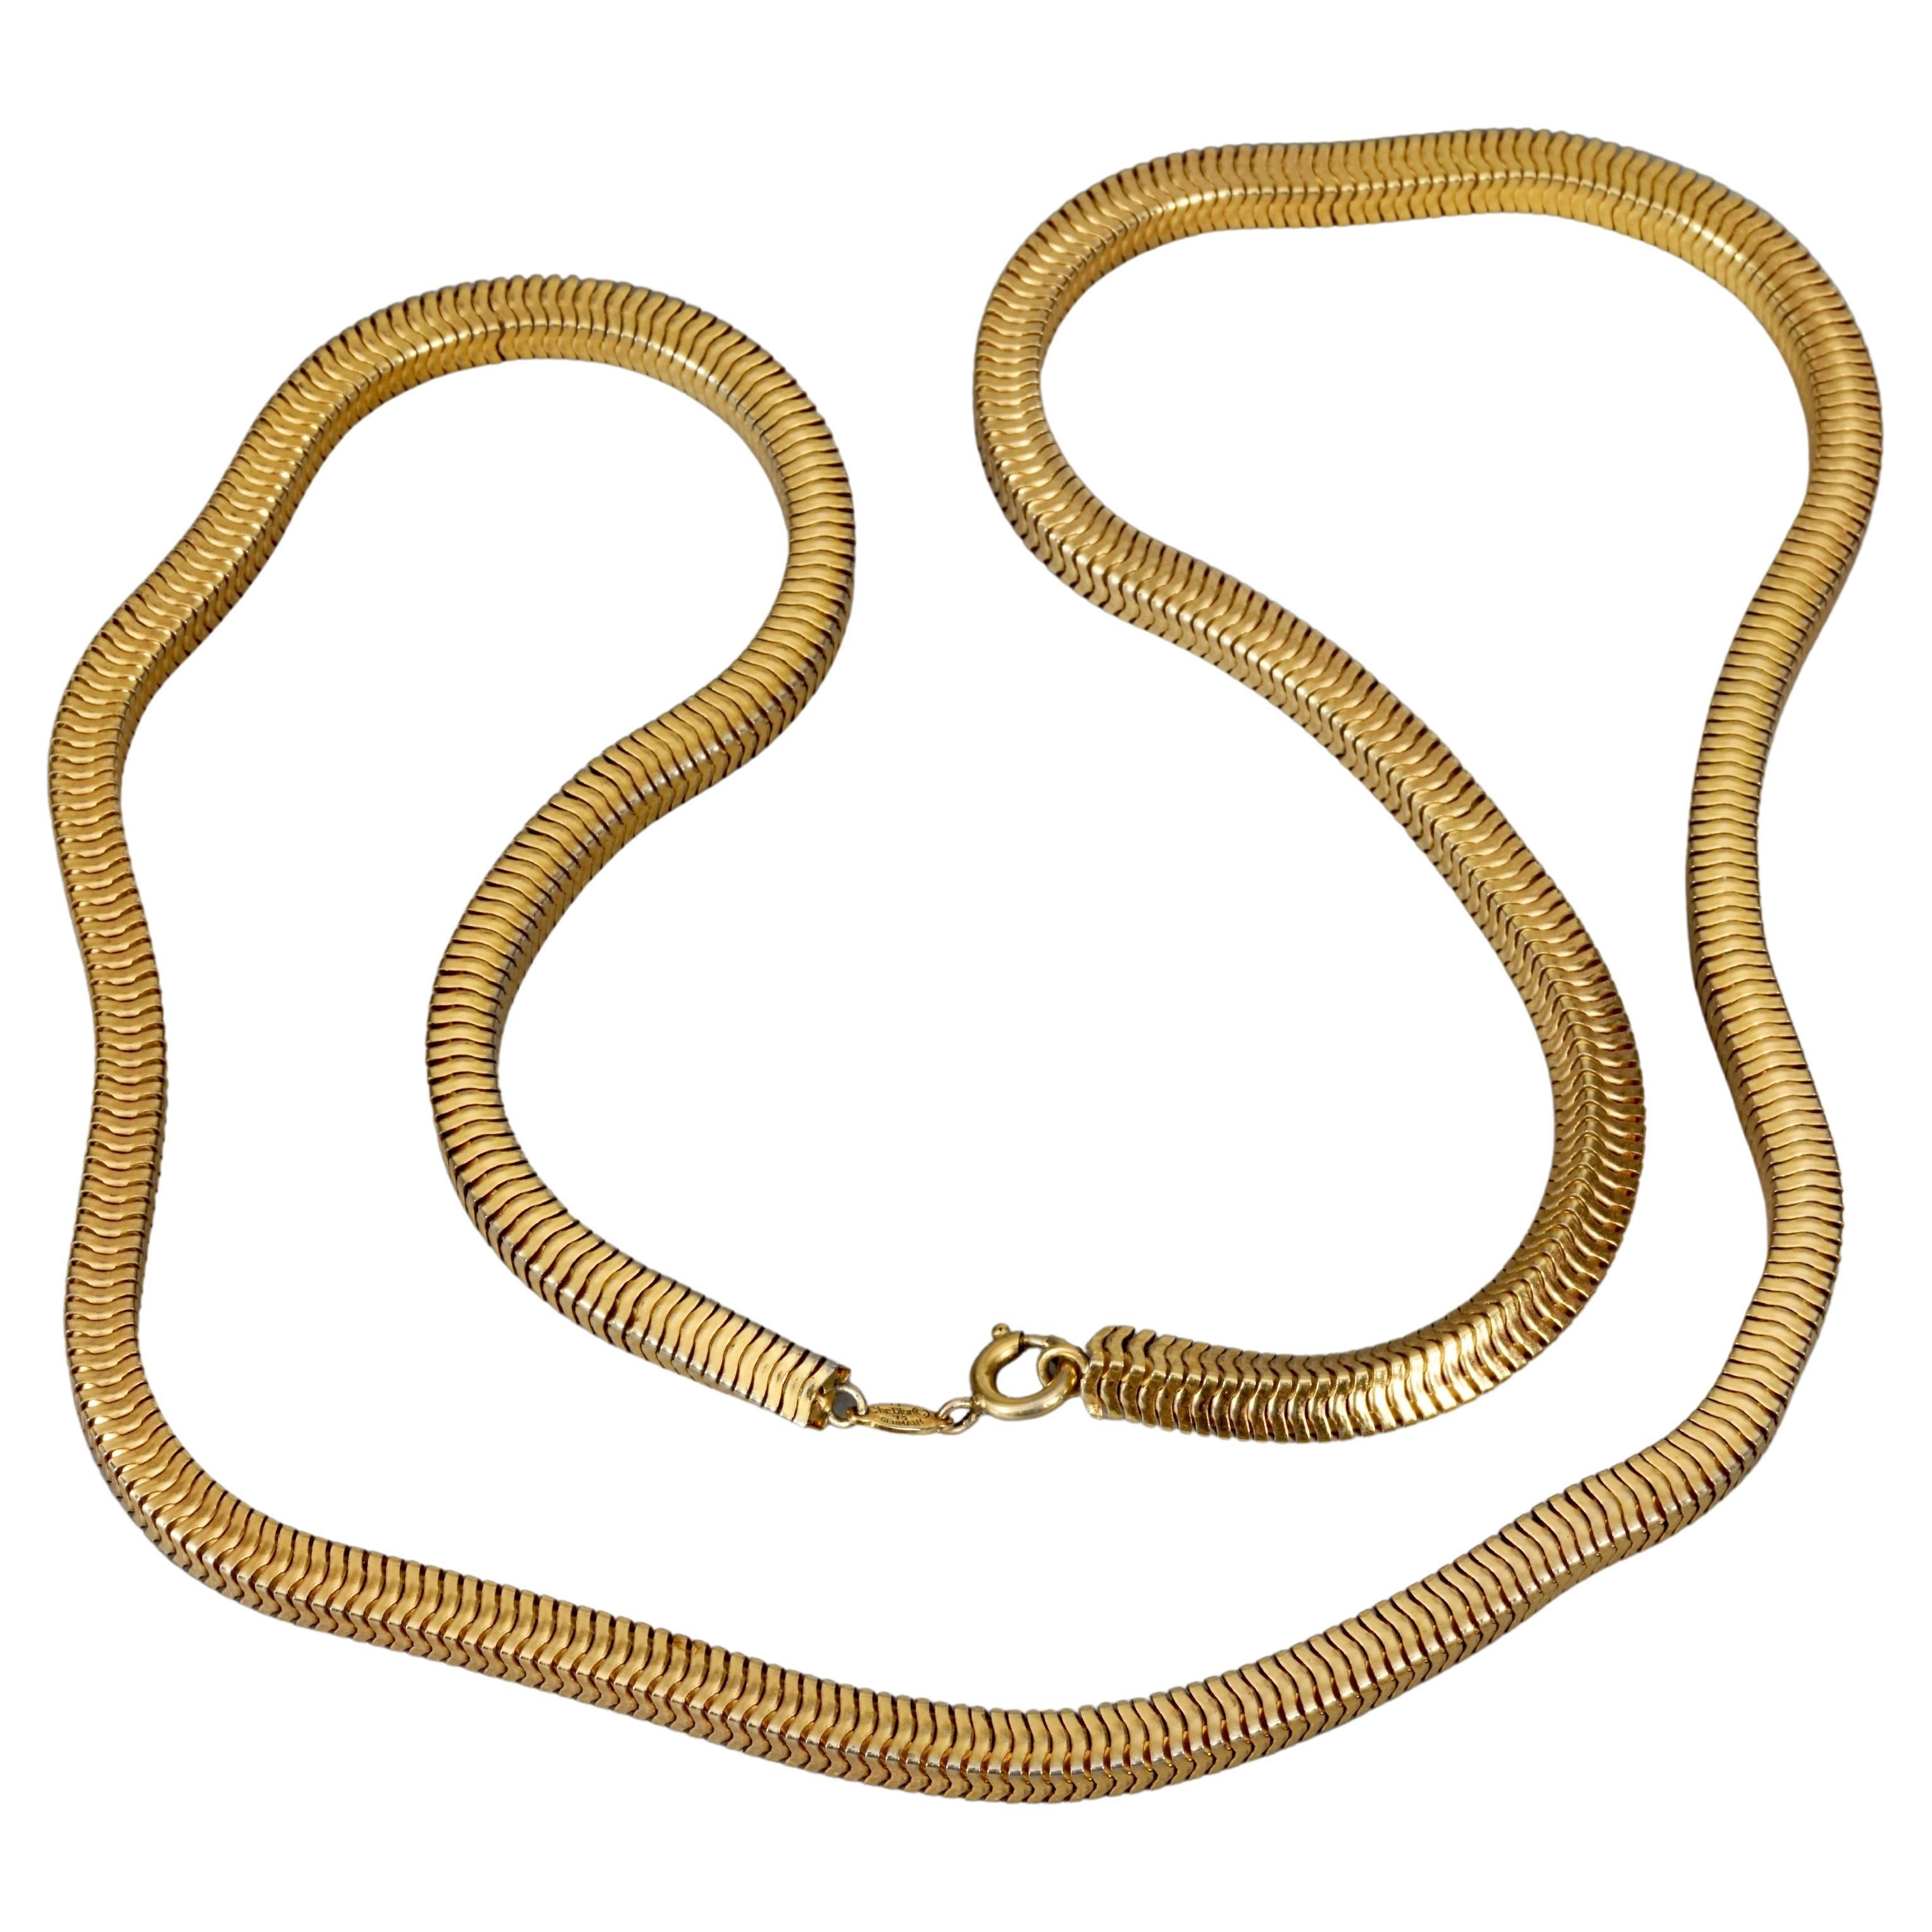 Vintage 1973 CHRISTIAN DIOR Gold Snake Chain Necklace For Sale